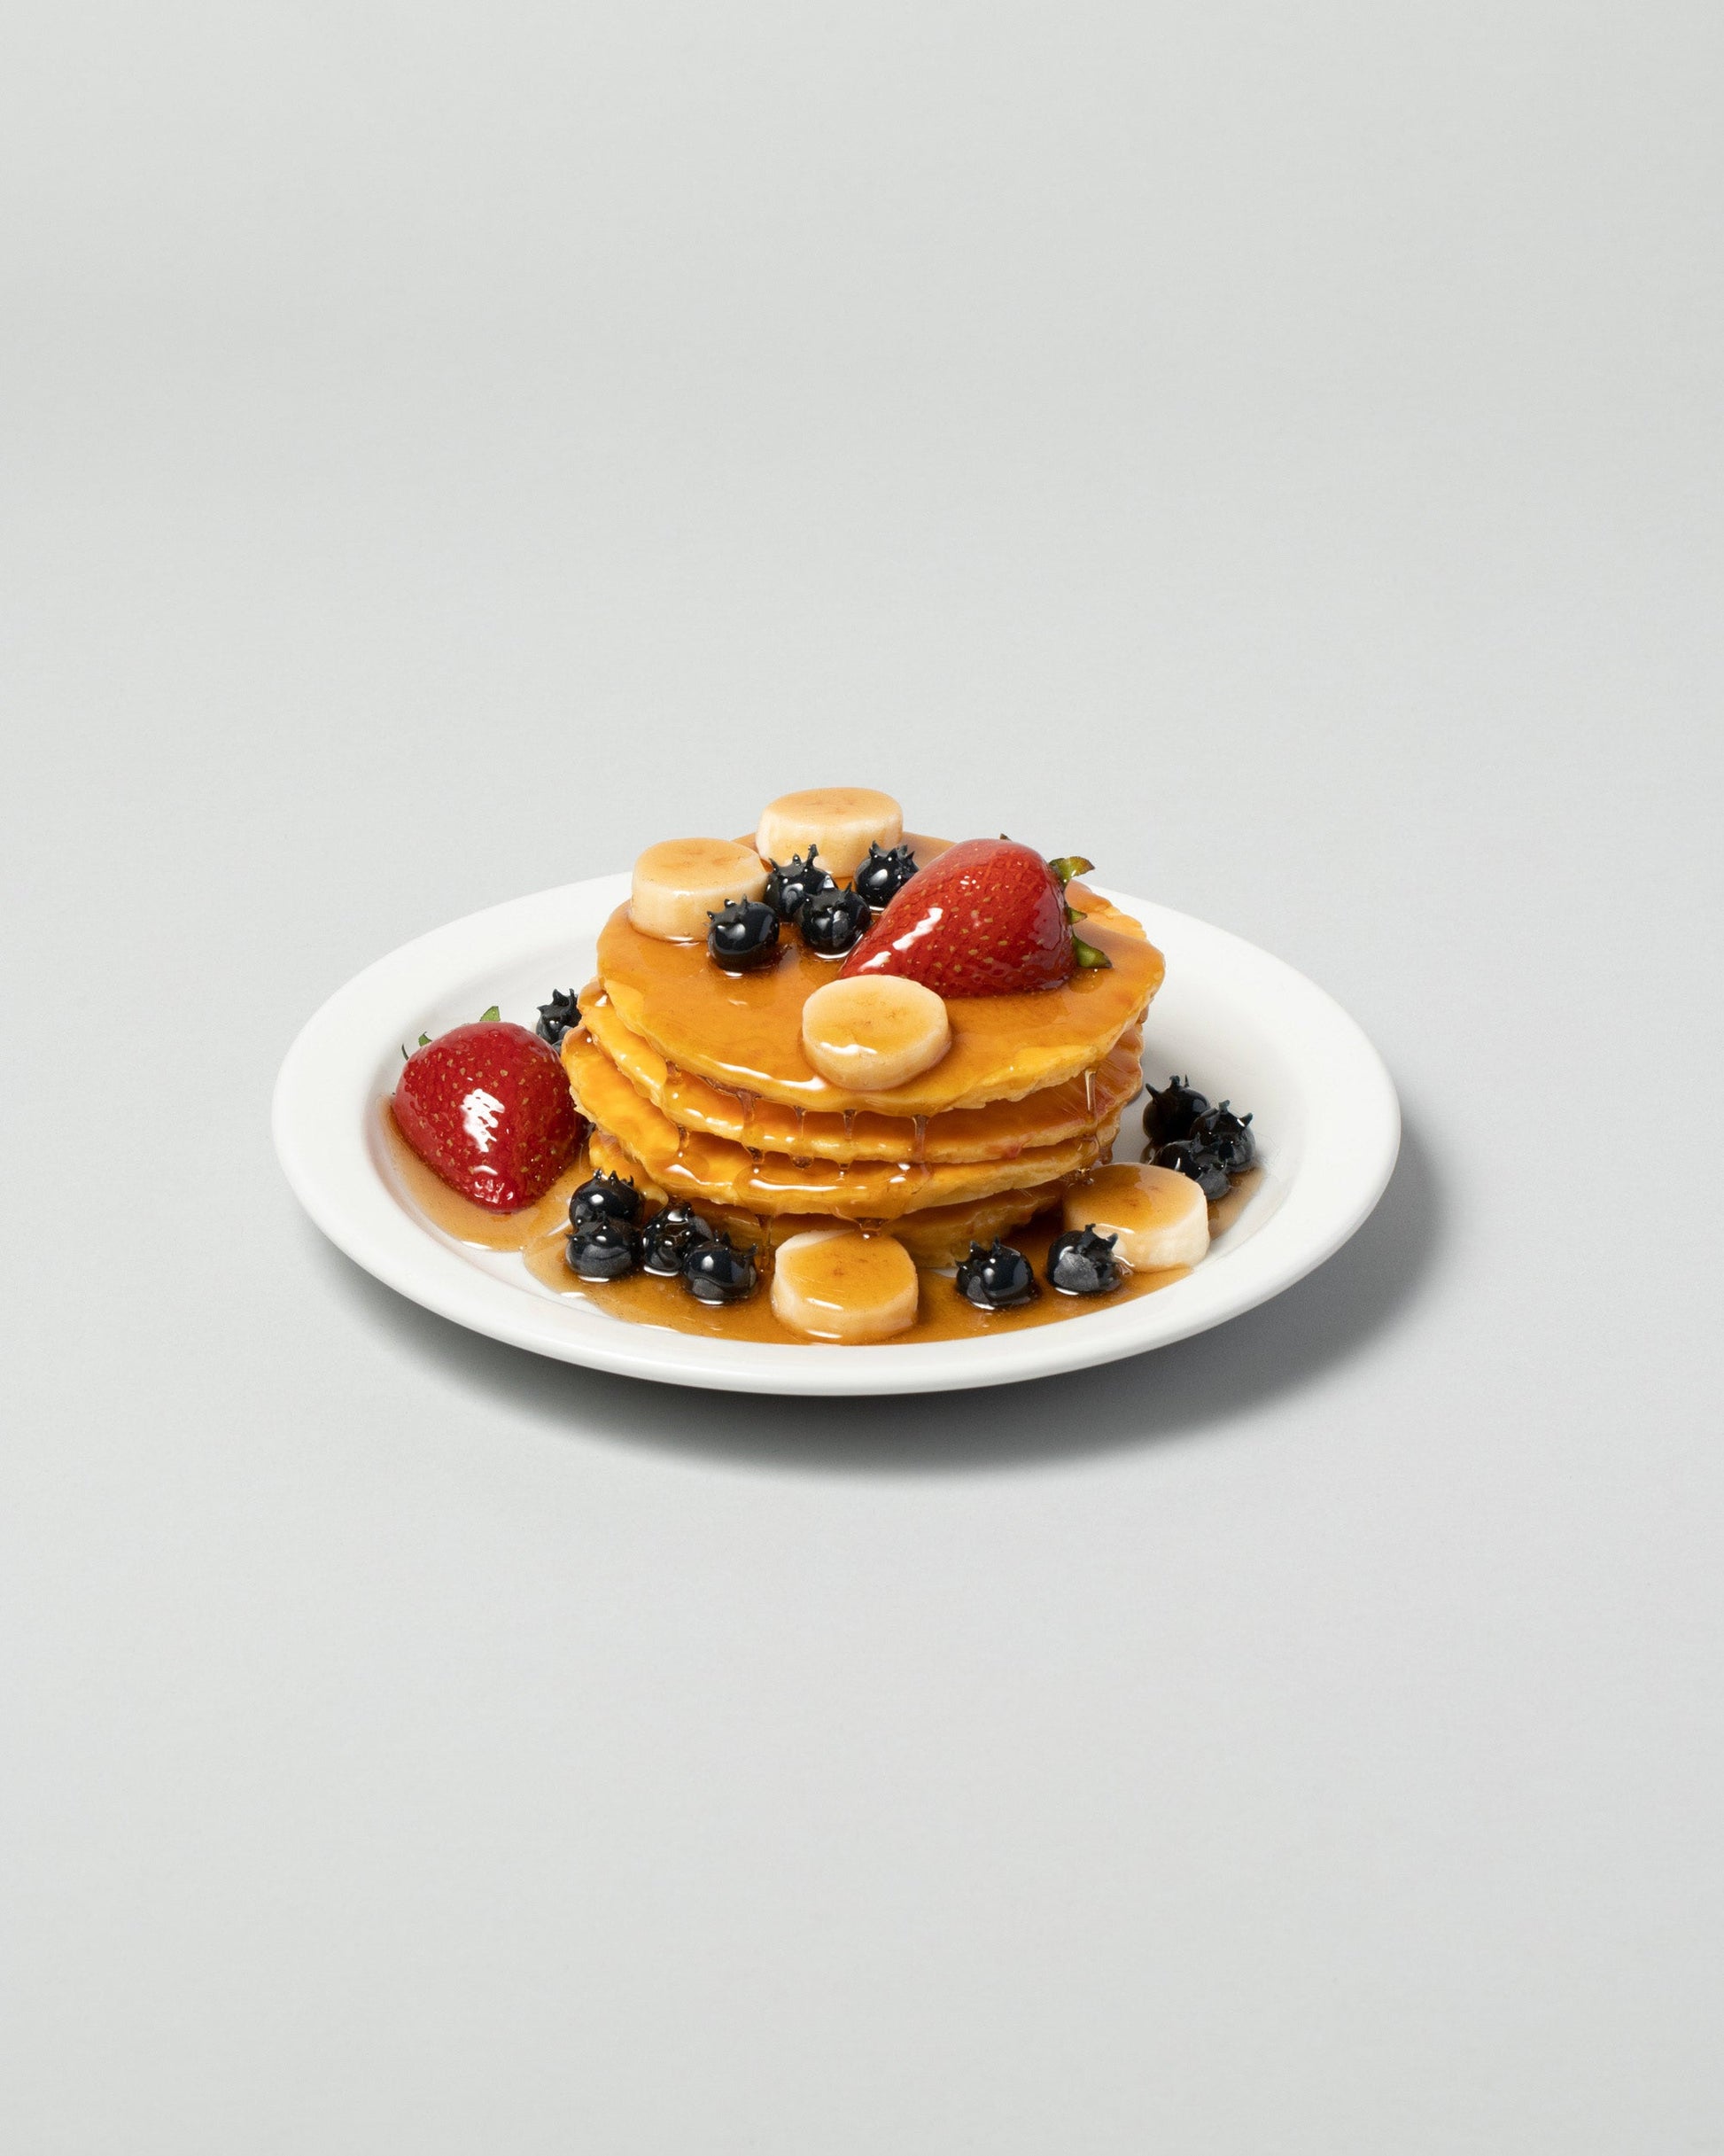  Pancakes & Waffles on light color background.